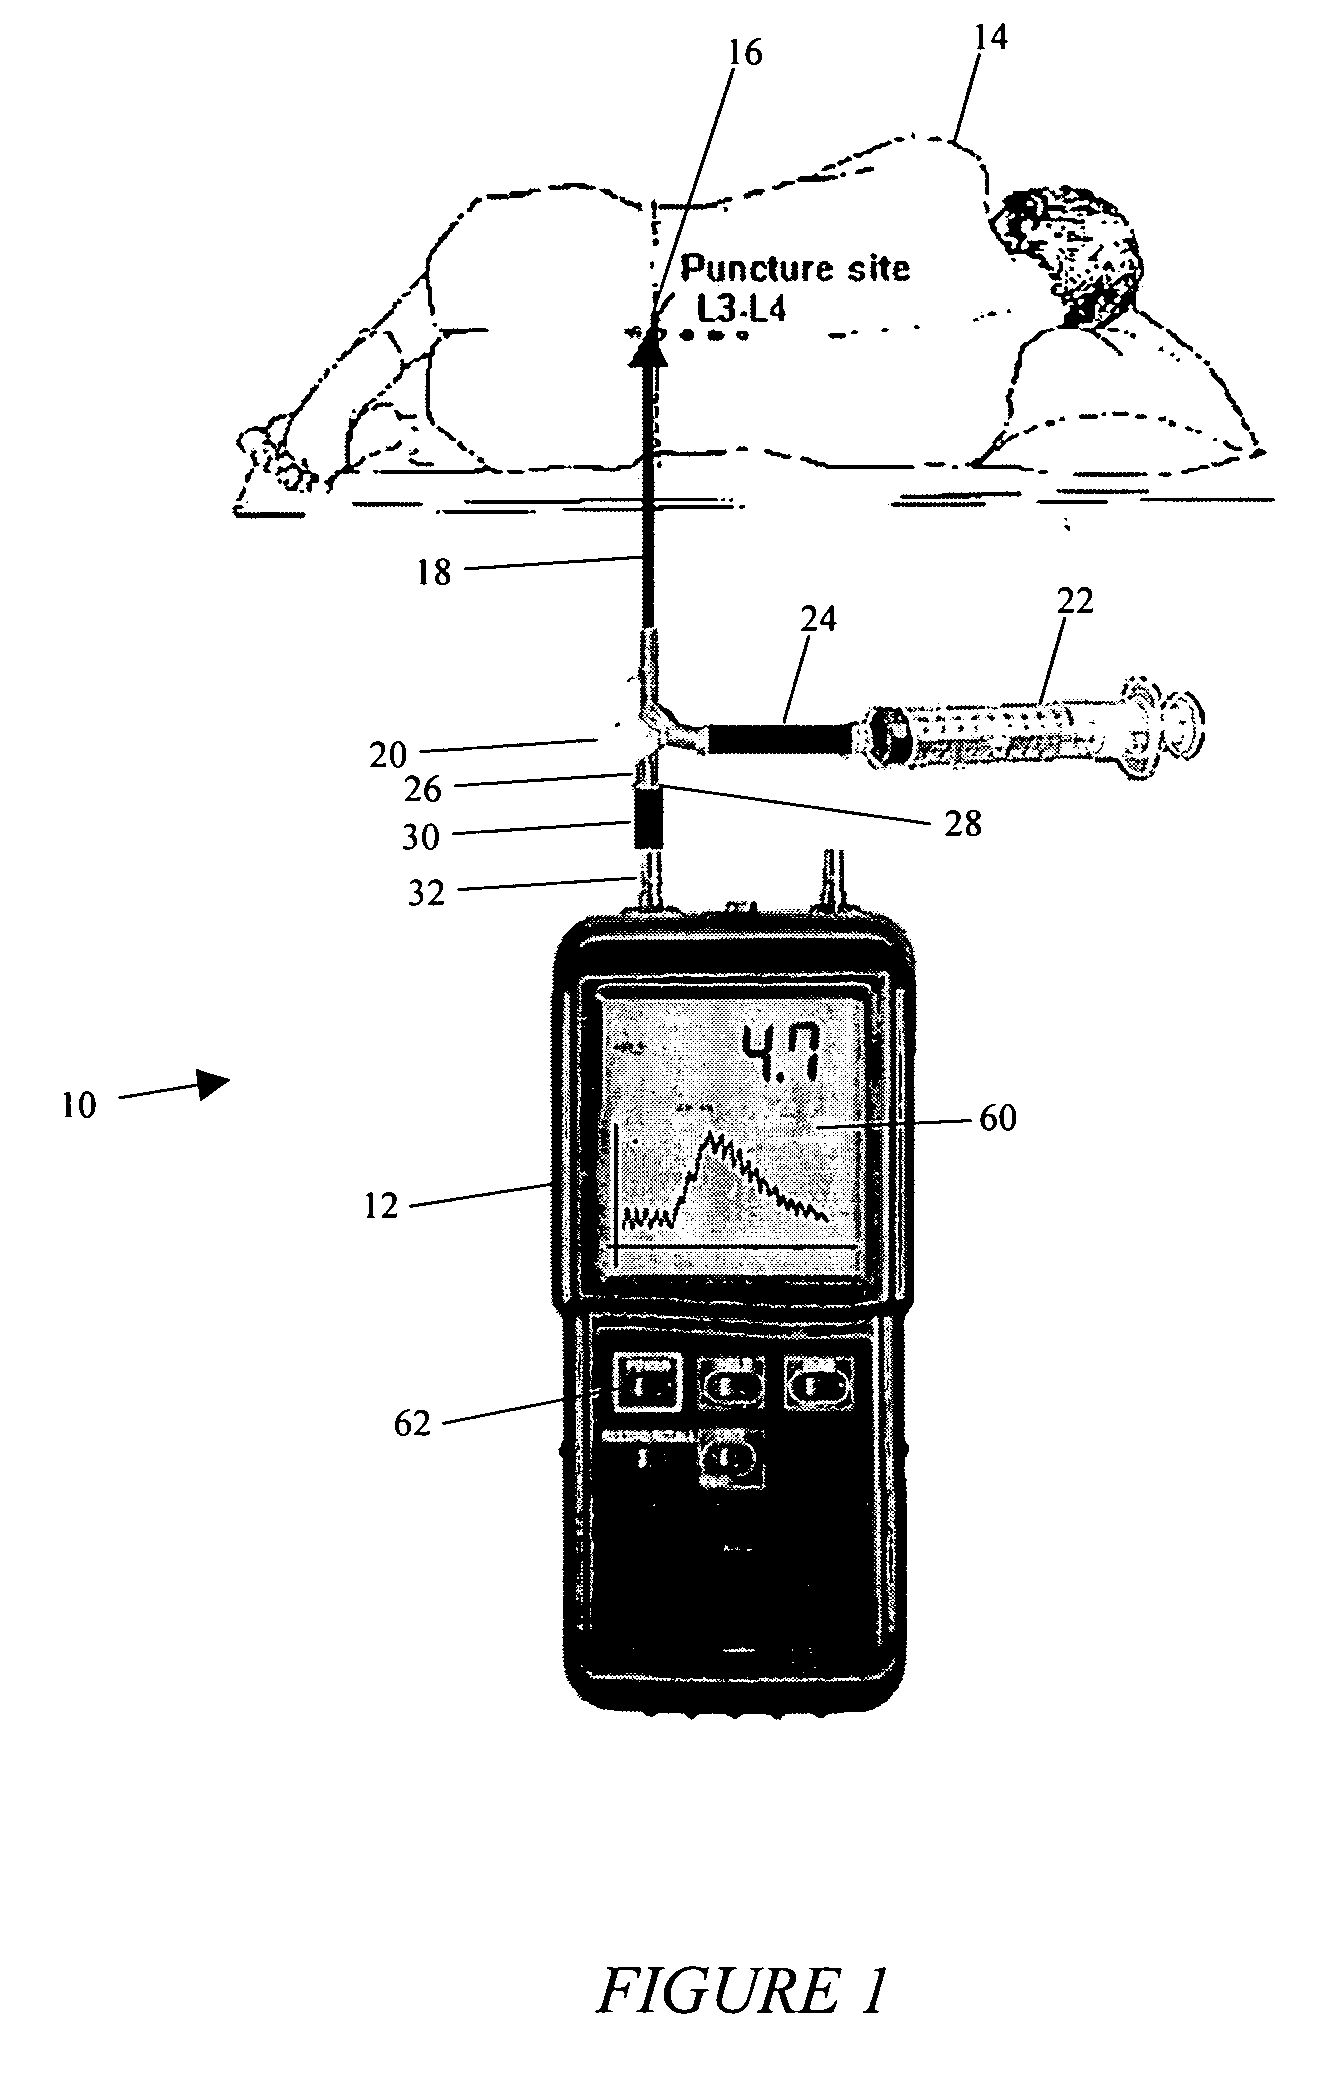 System and method for measuring the pressure of a fluid system within a patient